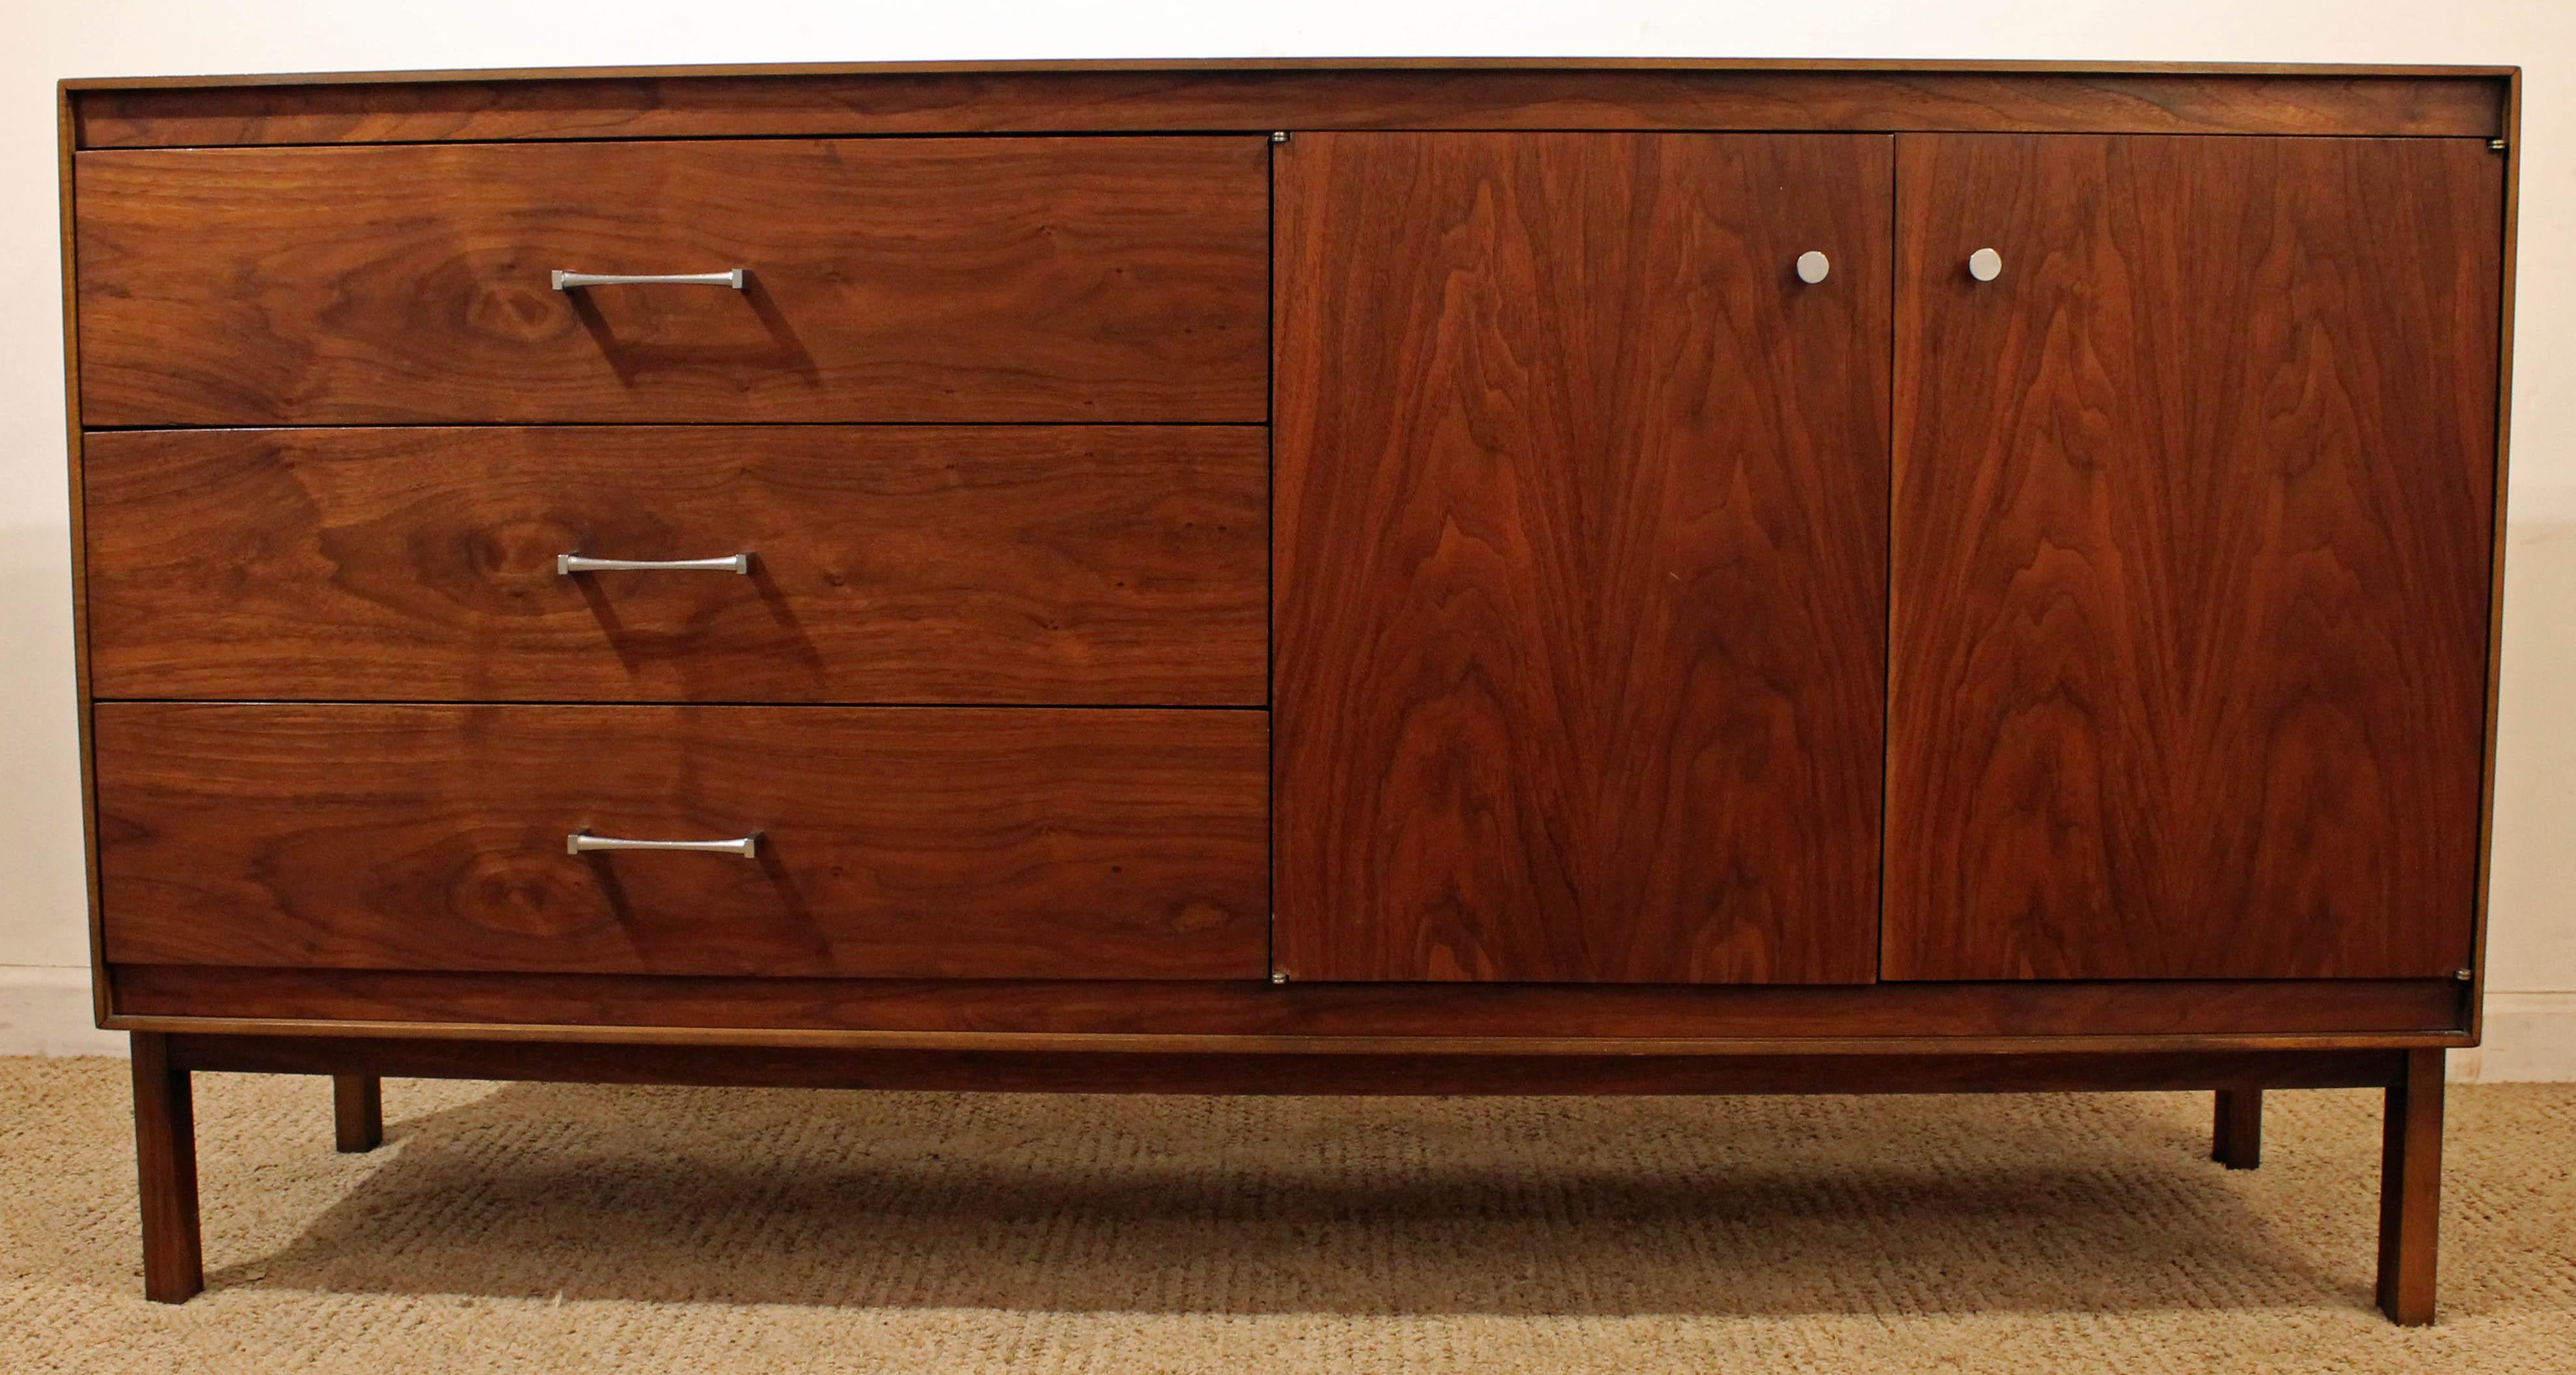 Offered is a Mid-Century Modern credenza, designed by Paul McCobb for Lane 